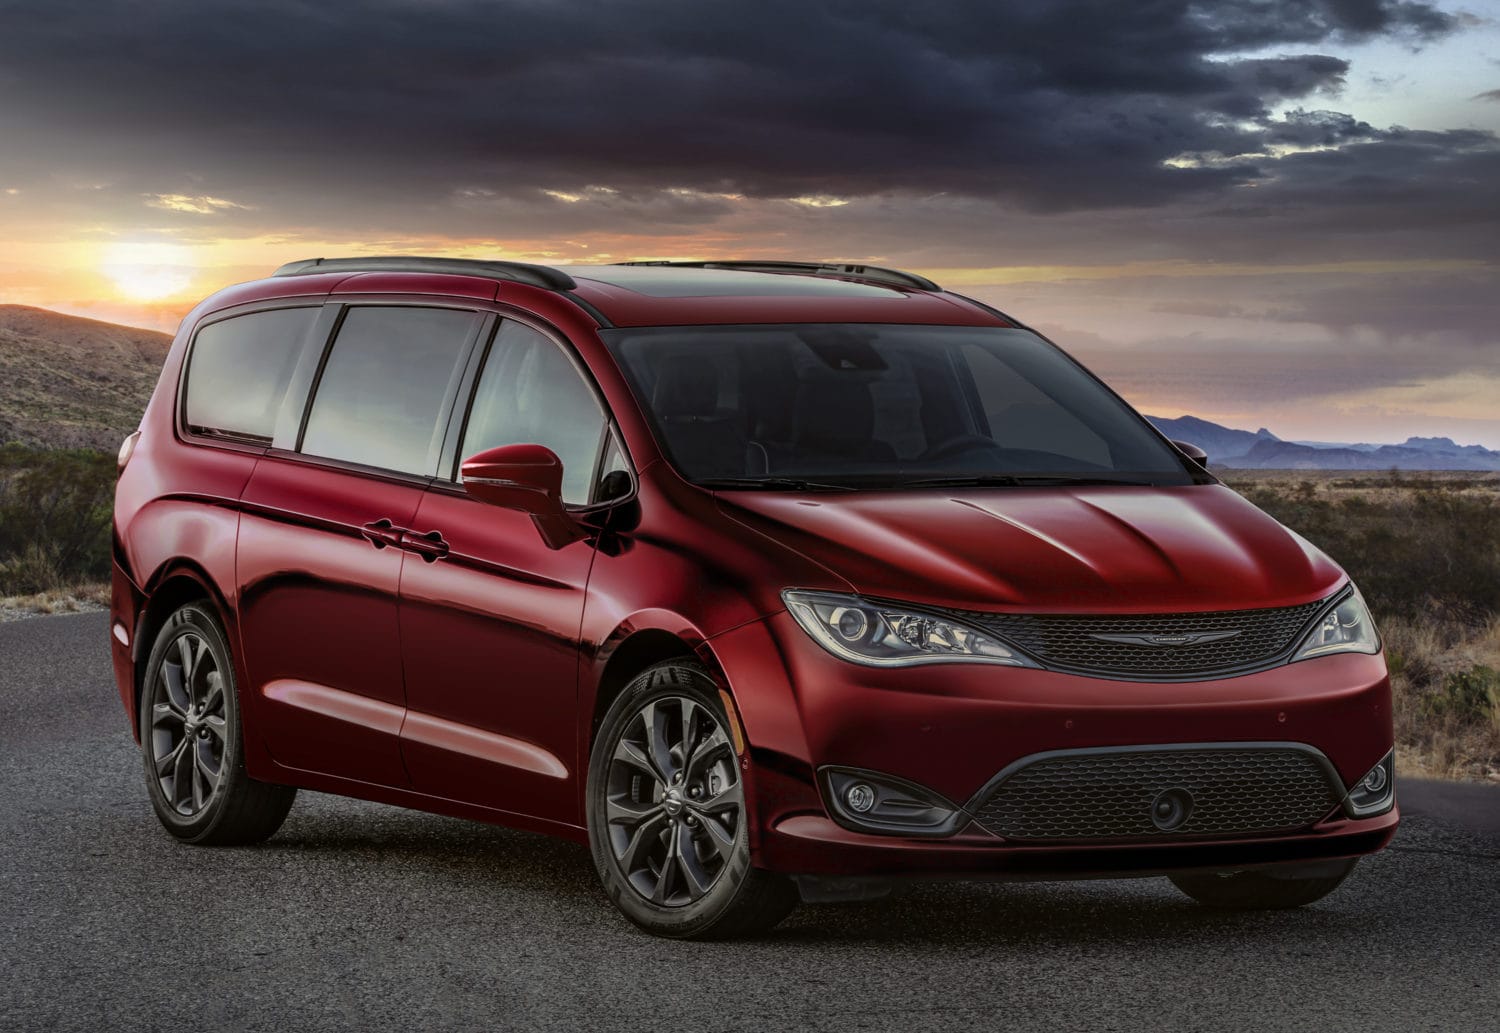 chrysler-pacifica-35th-anniversary-edition-is-sharp-focus-daily-news